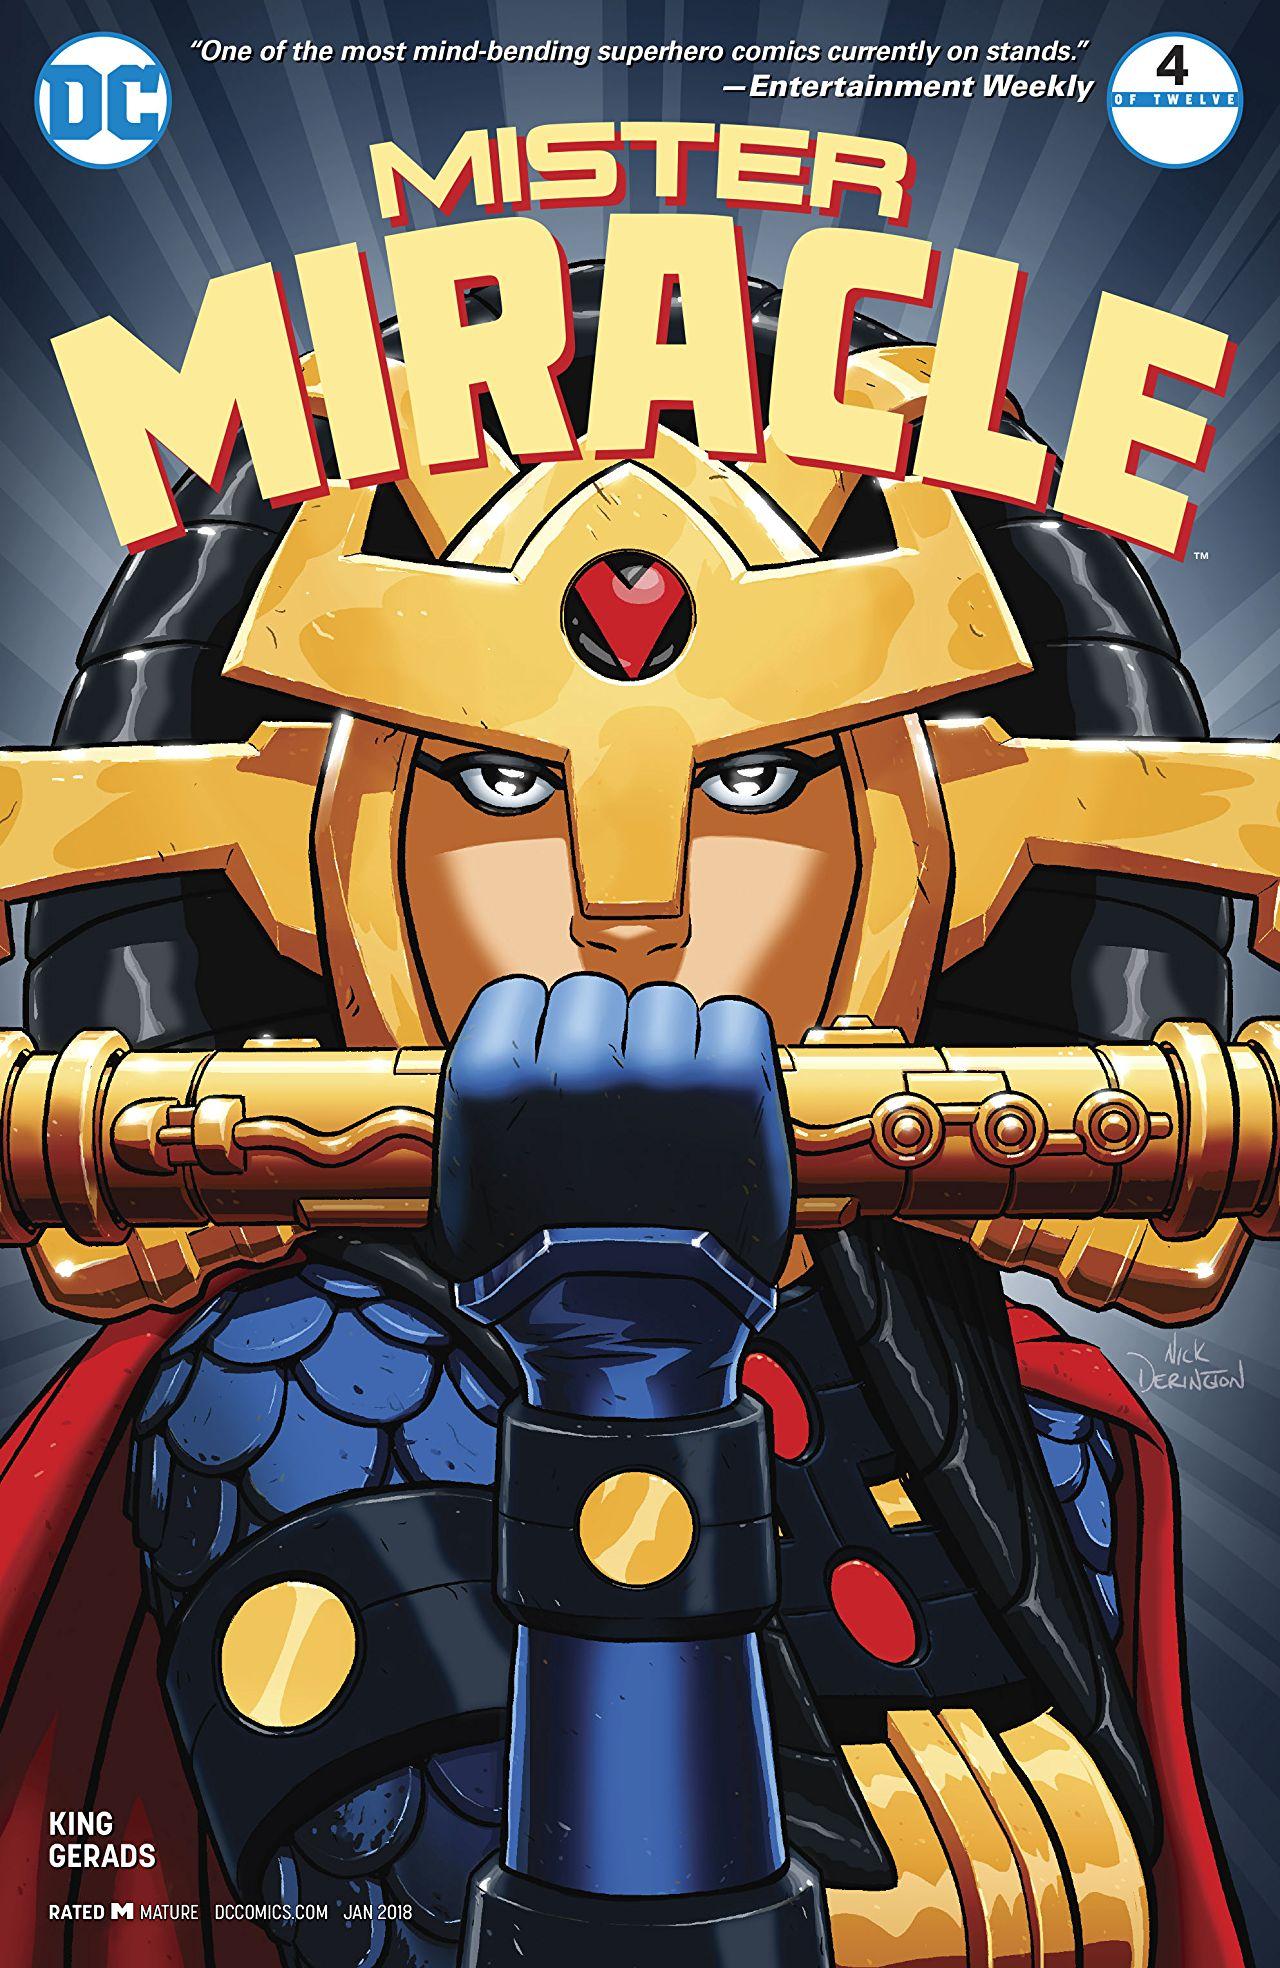 Mister Miracle Vol. 4 #4